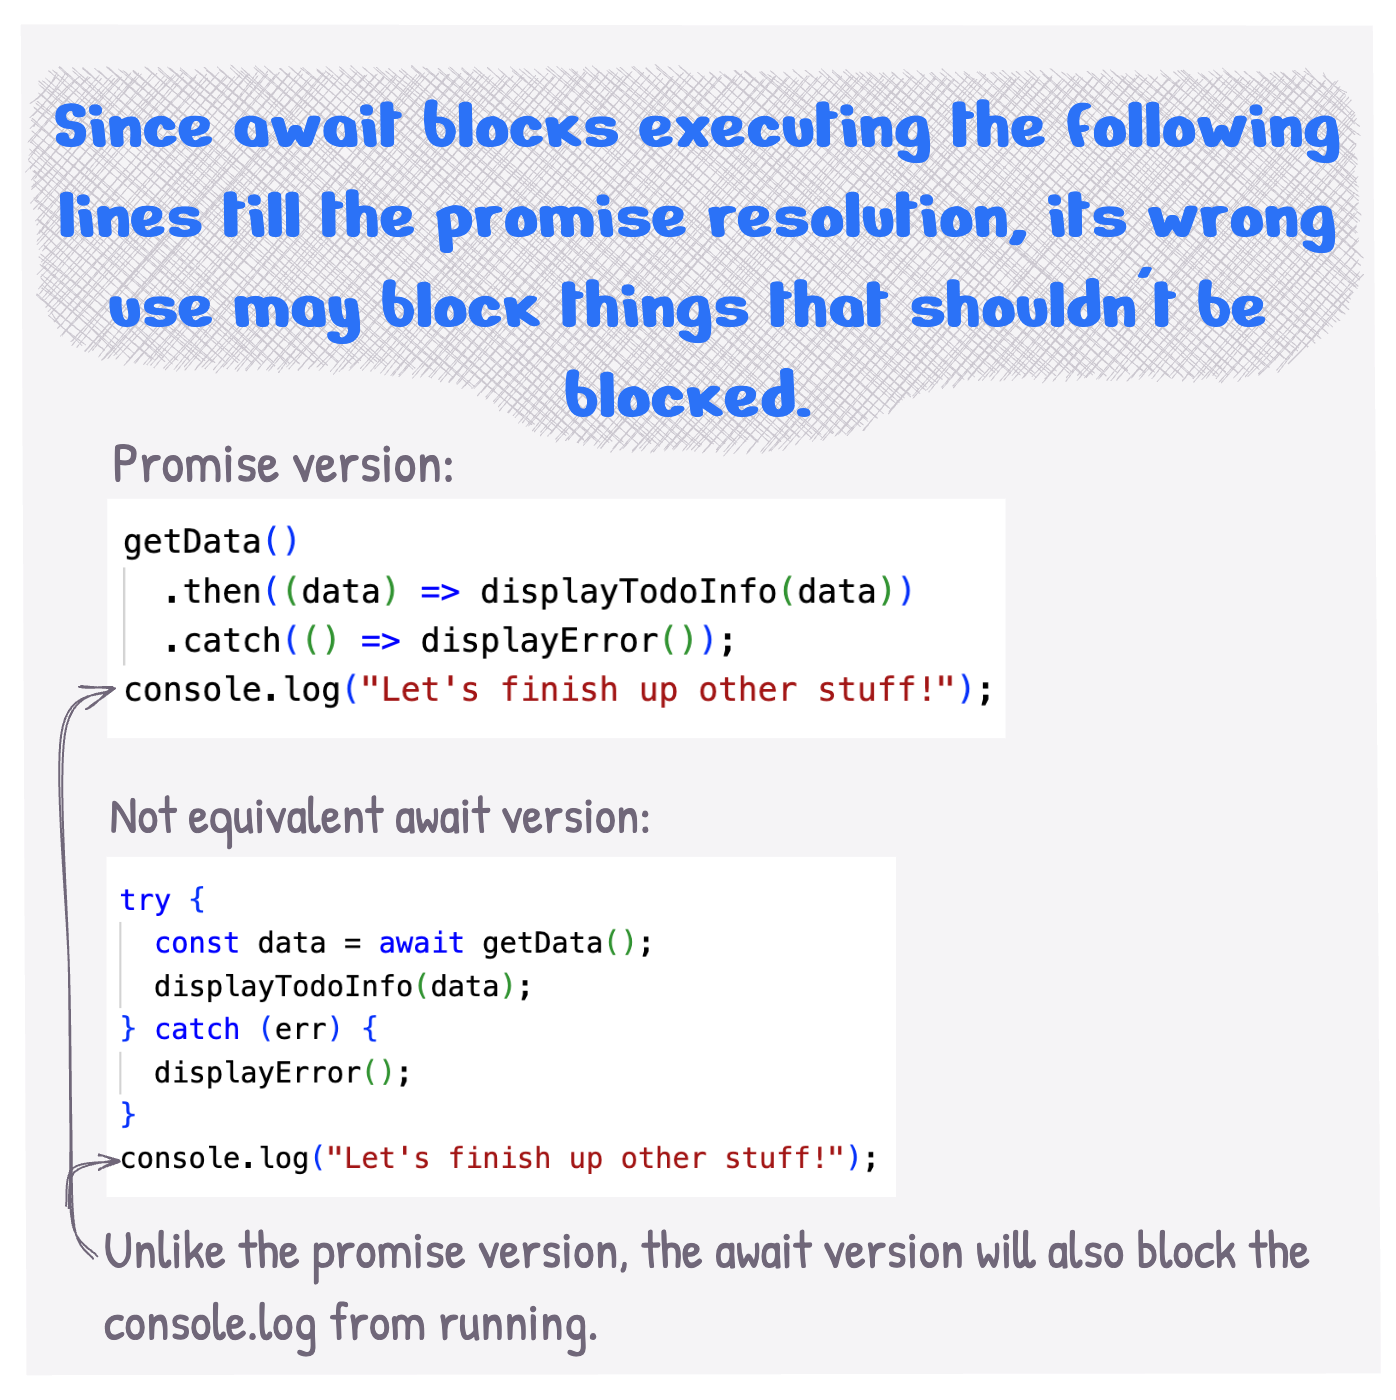 Since await blocks executing the following lines till the promise resolution, its wrong use may block things that shouldn't be blocked.